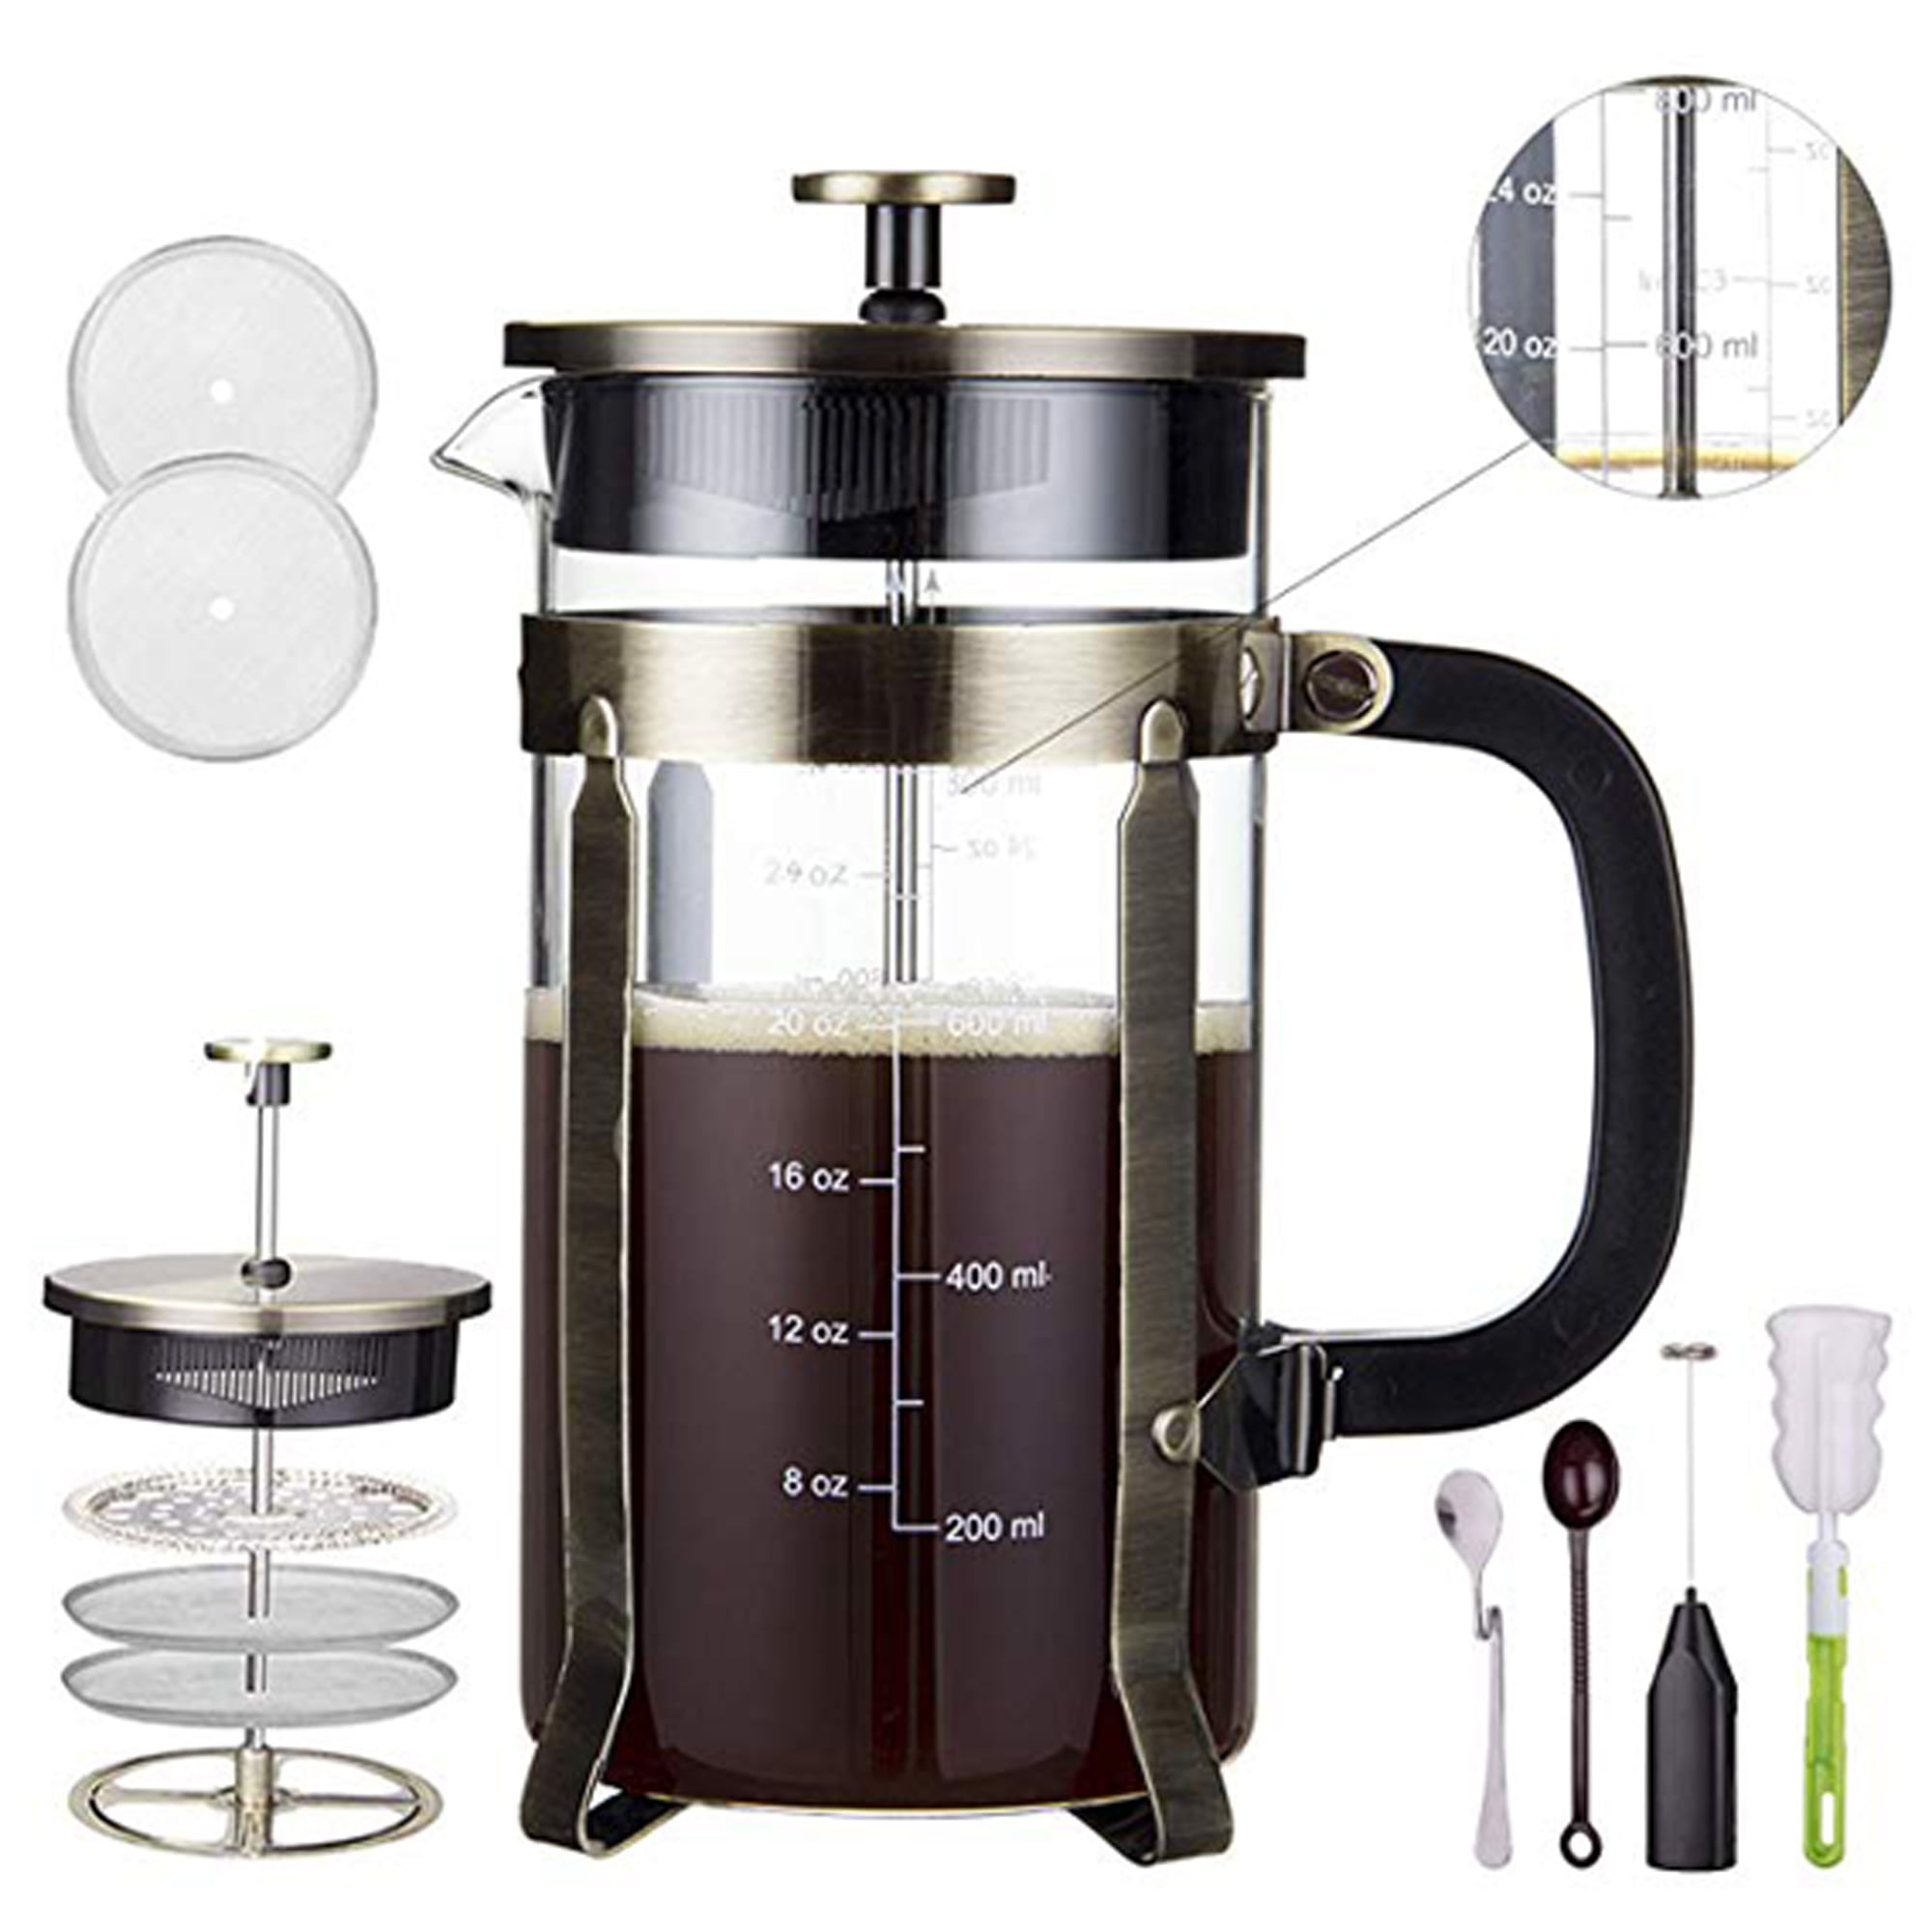 CrossCreek French Press Coffee Maker, 304 Stainless Steel Coffee Press 34oz (4 Cups) Tea Maker with 60g Coffee Canister, Double Wall French Presses